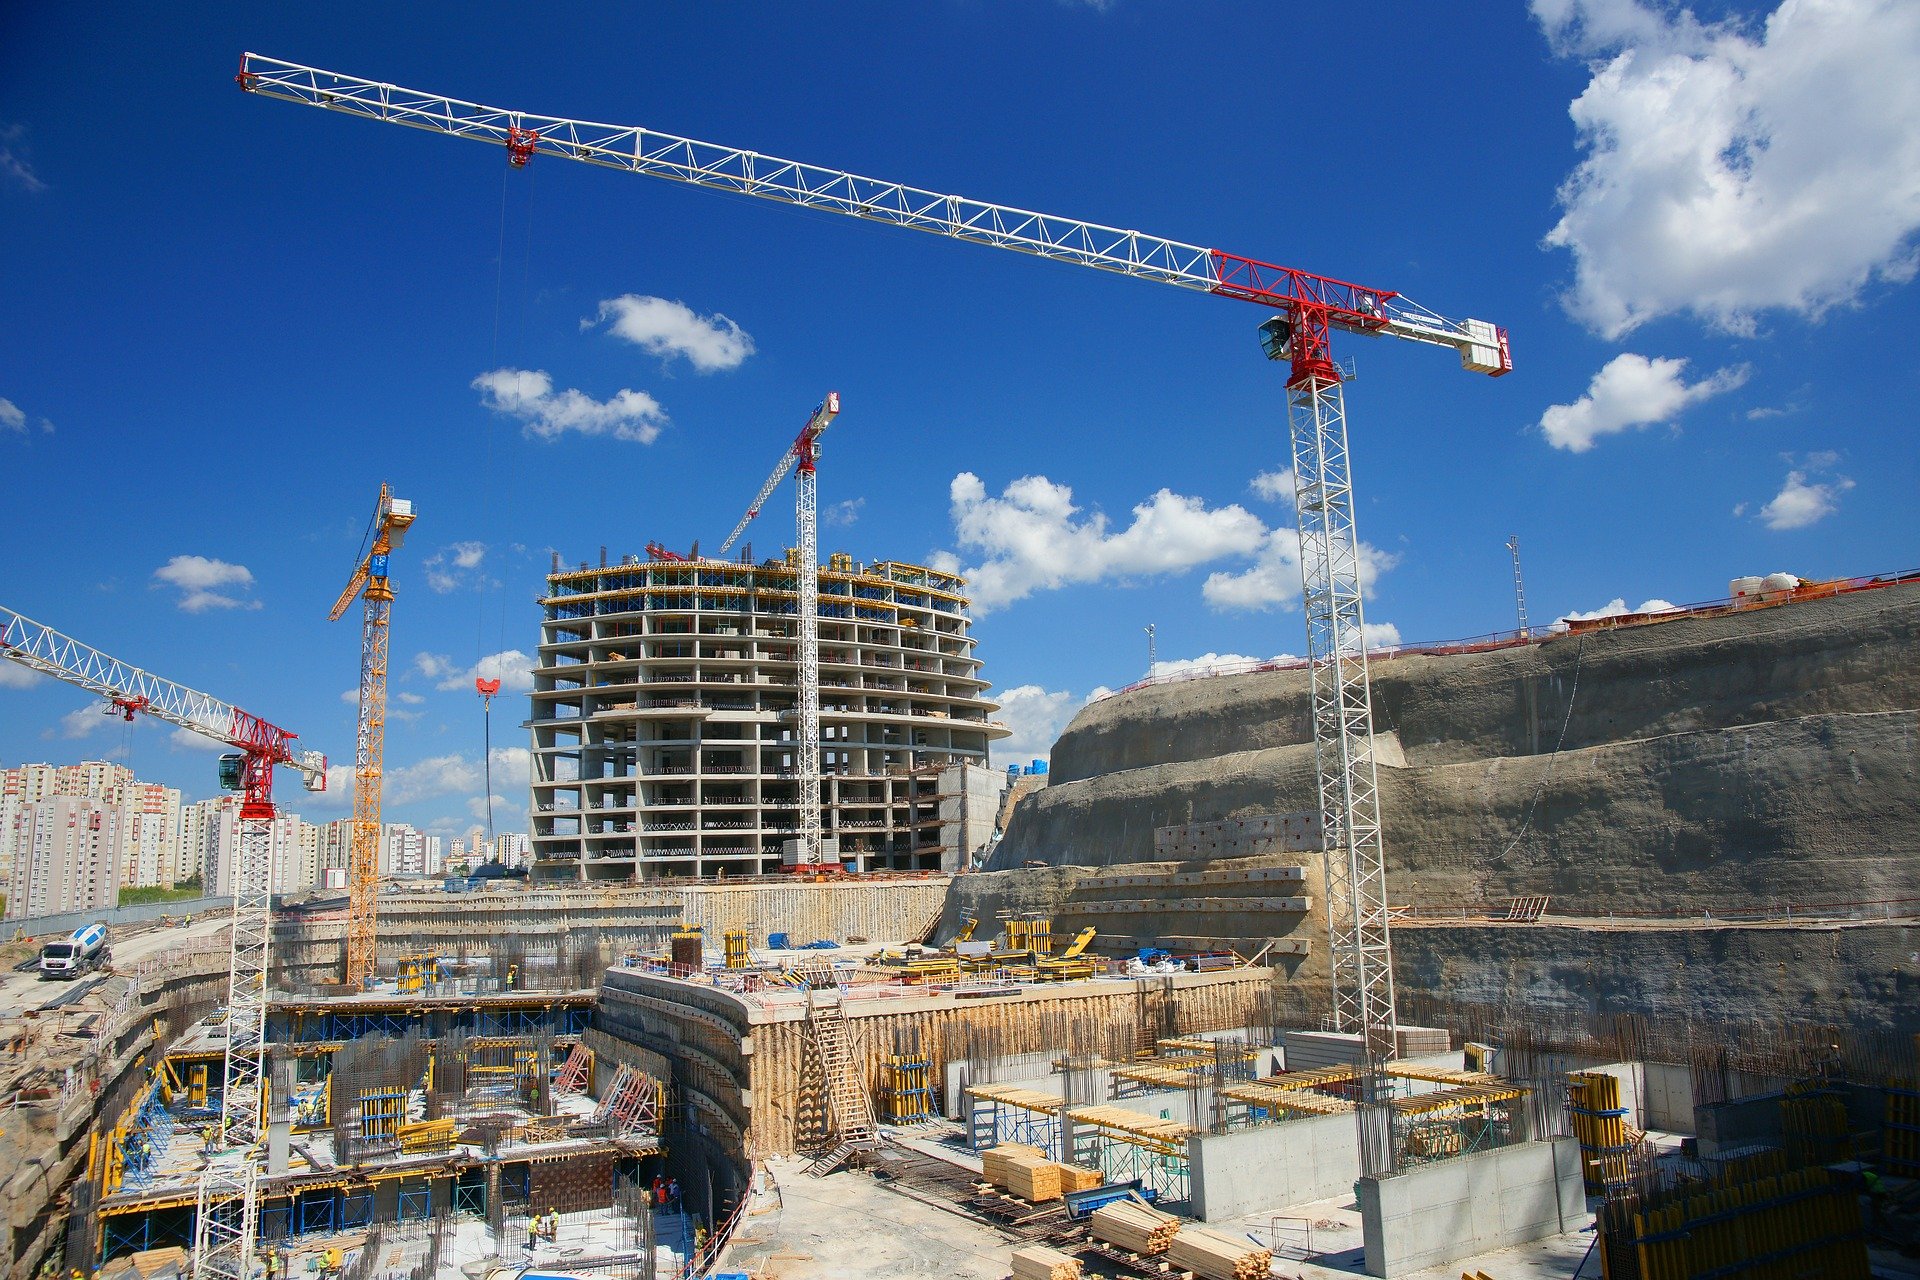 Five largest construction projects initiated in Spain in Q4 2021